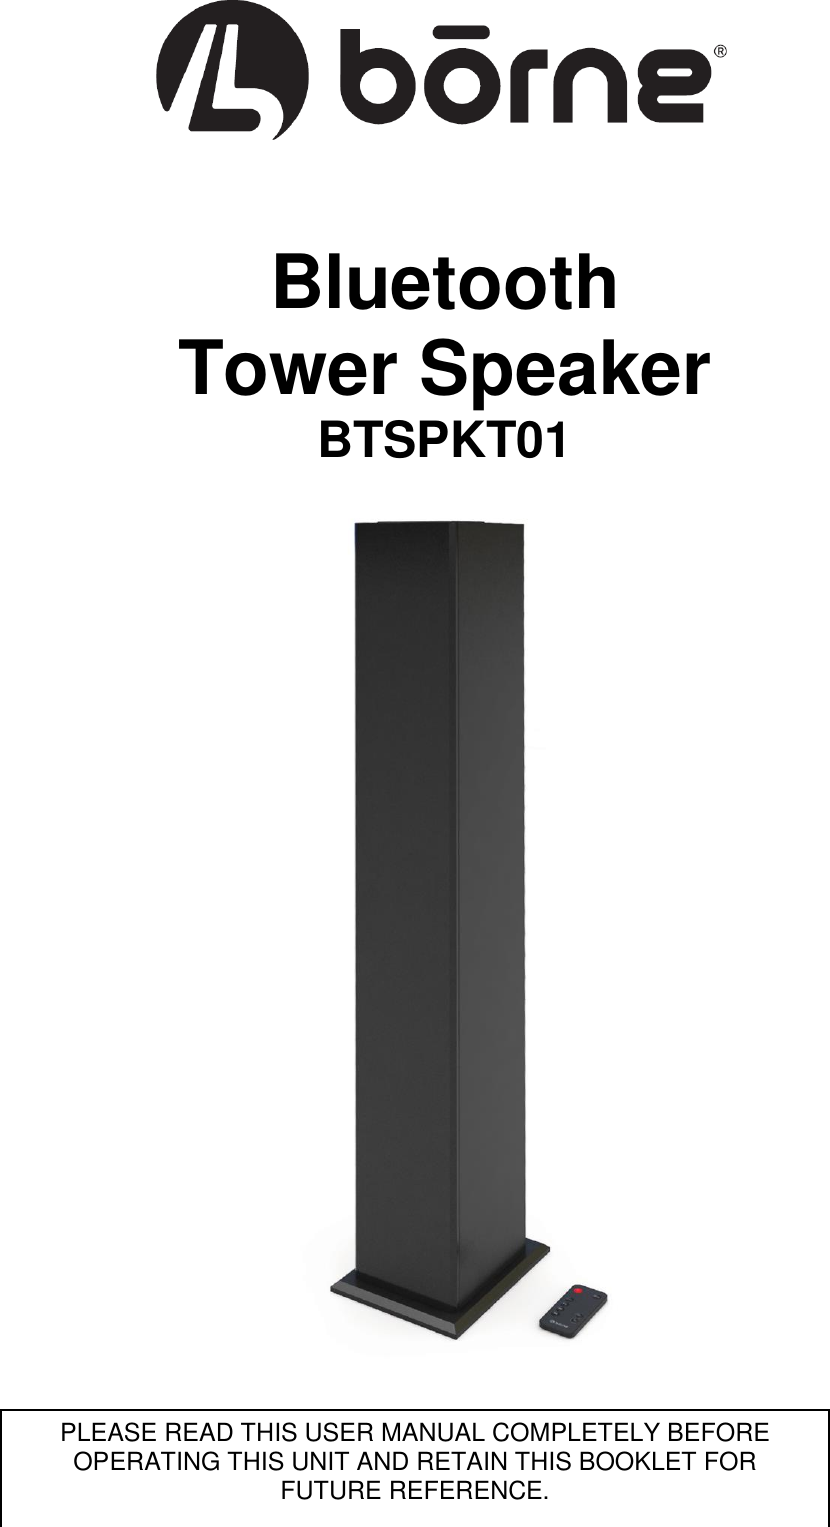       Bluetooth Tower Speaker BTSPKT01                                          PLEASE READ THIS USER MANUAL COMPLETELY BEFORE OPERATING THIS UNIT AND RETAIN THIS BOOKLET FOR FUTURE REFERENCE. 